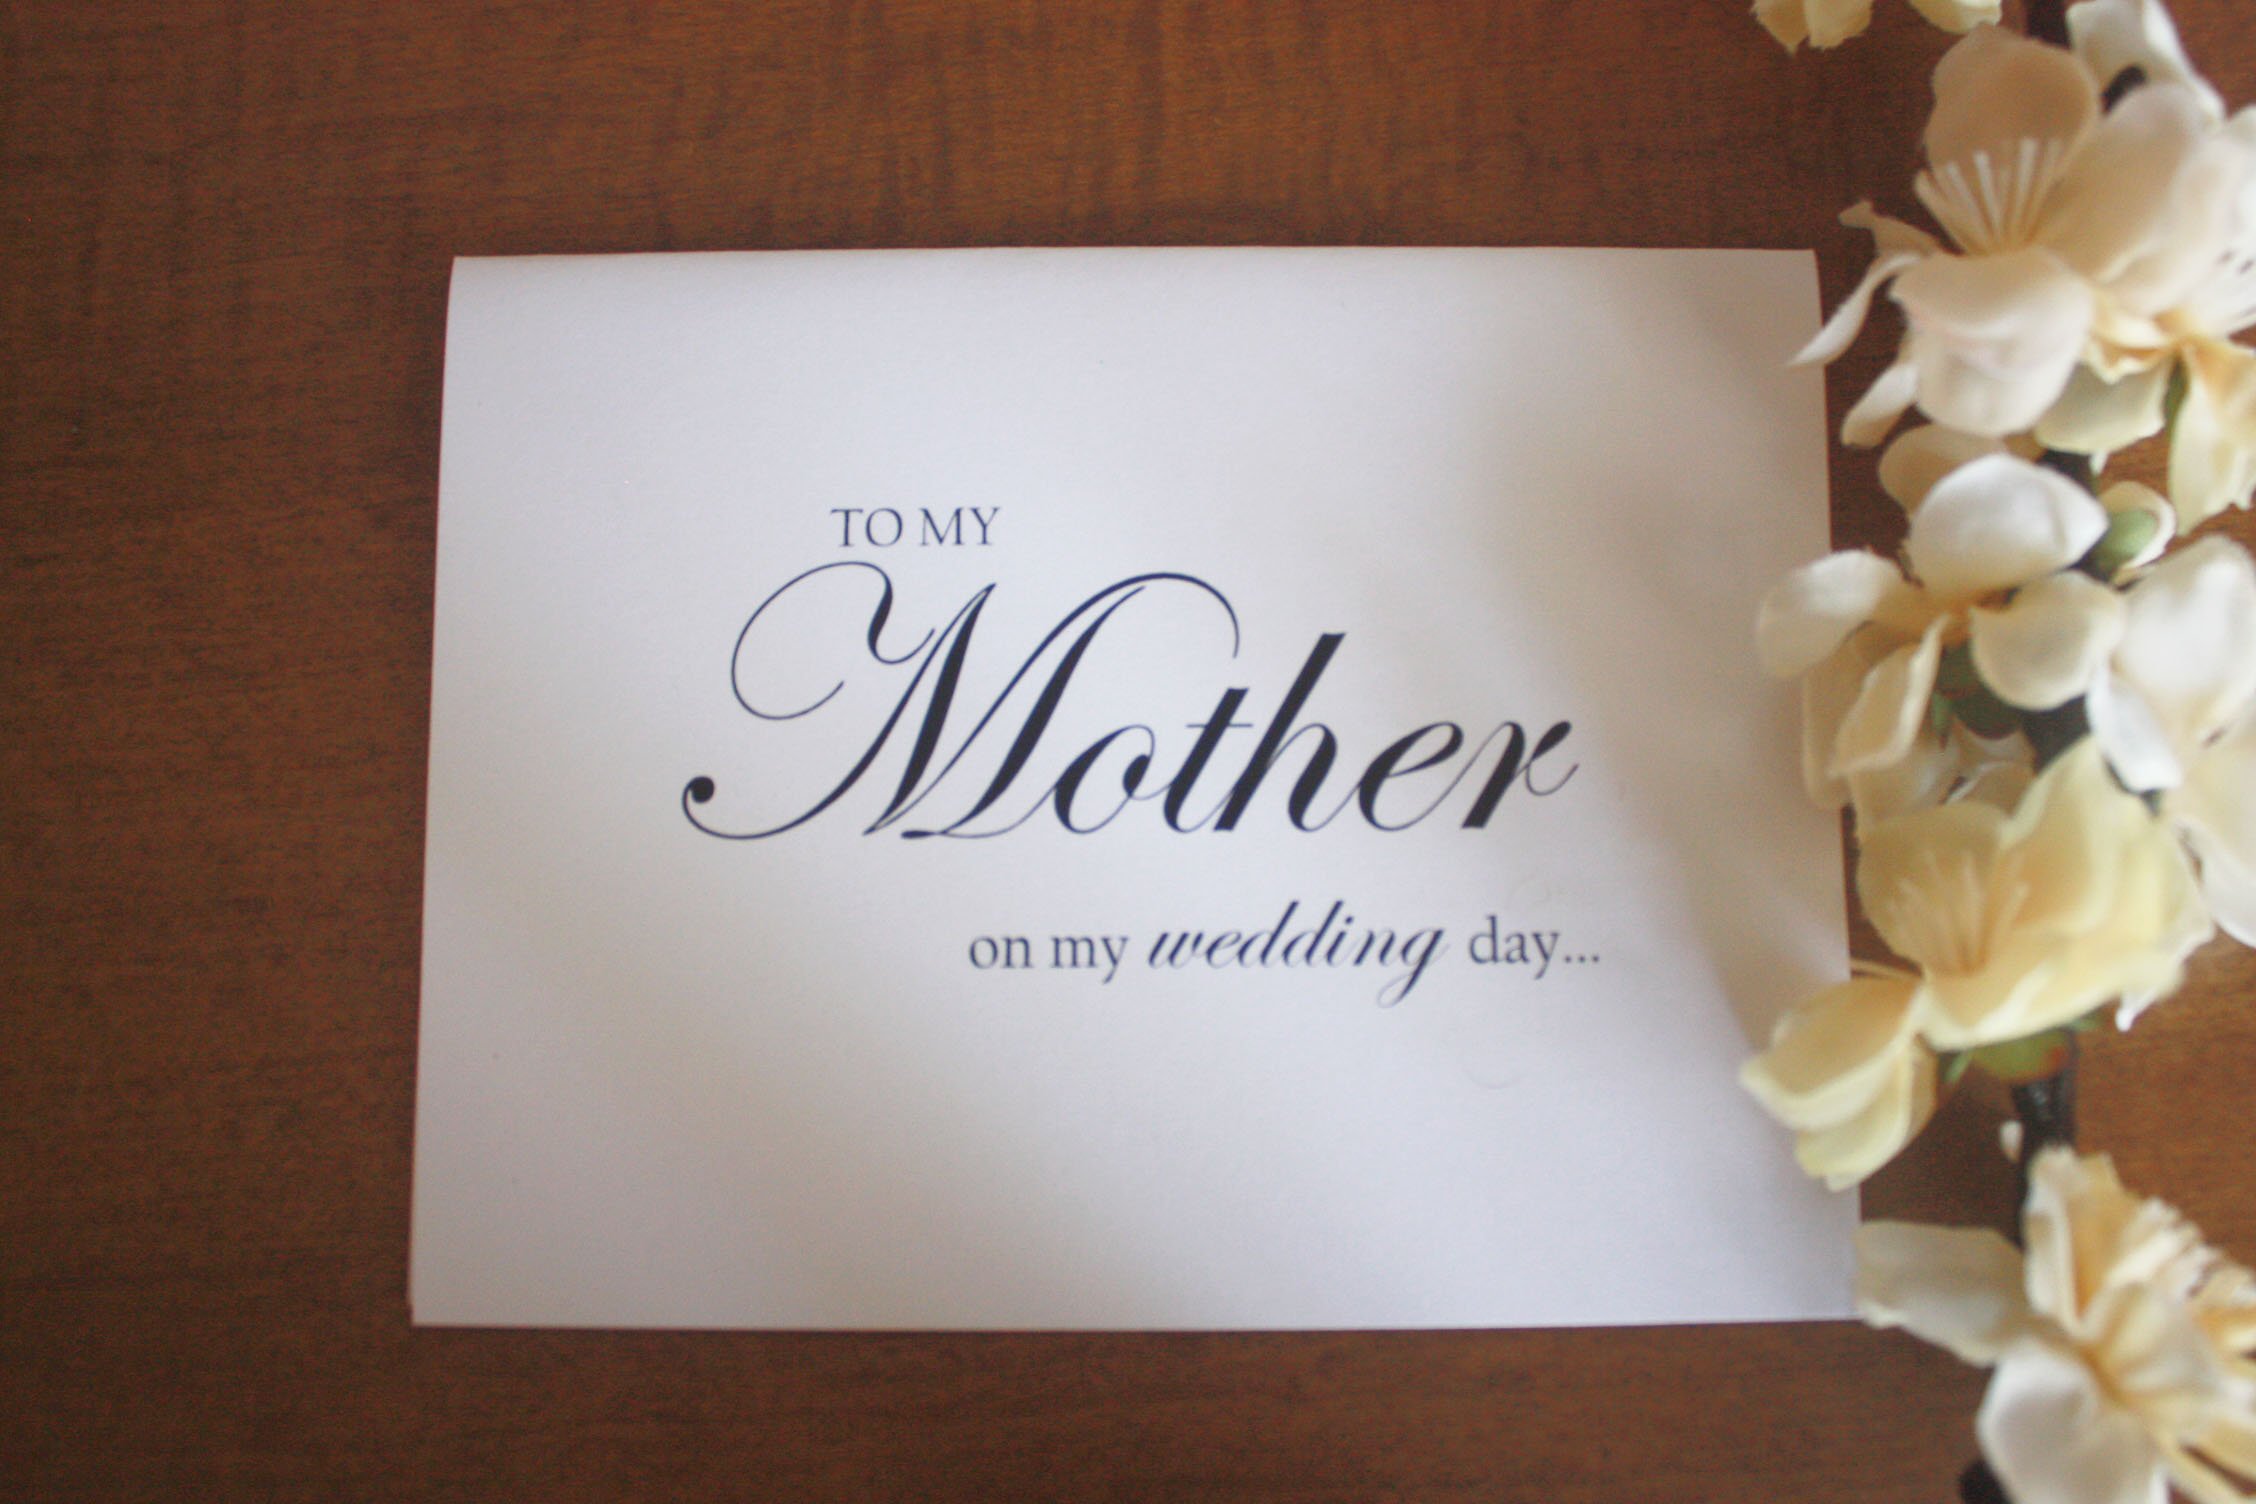 To my mother on my wedding day